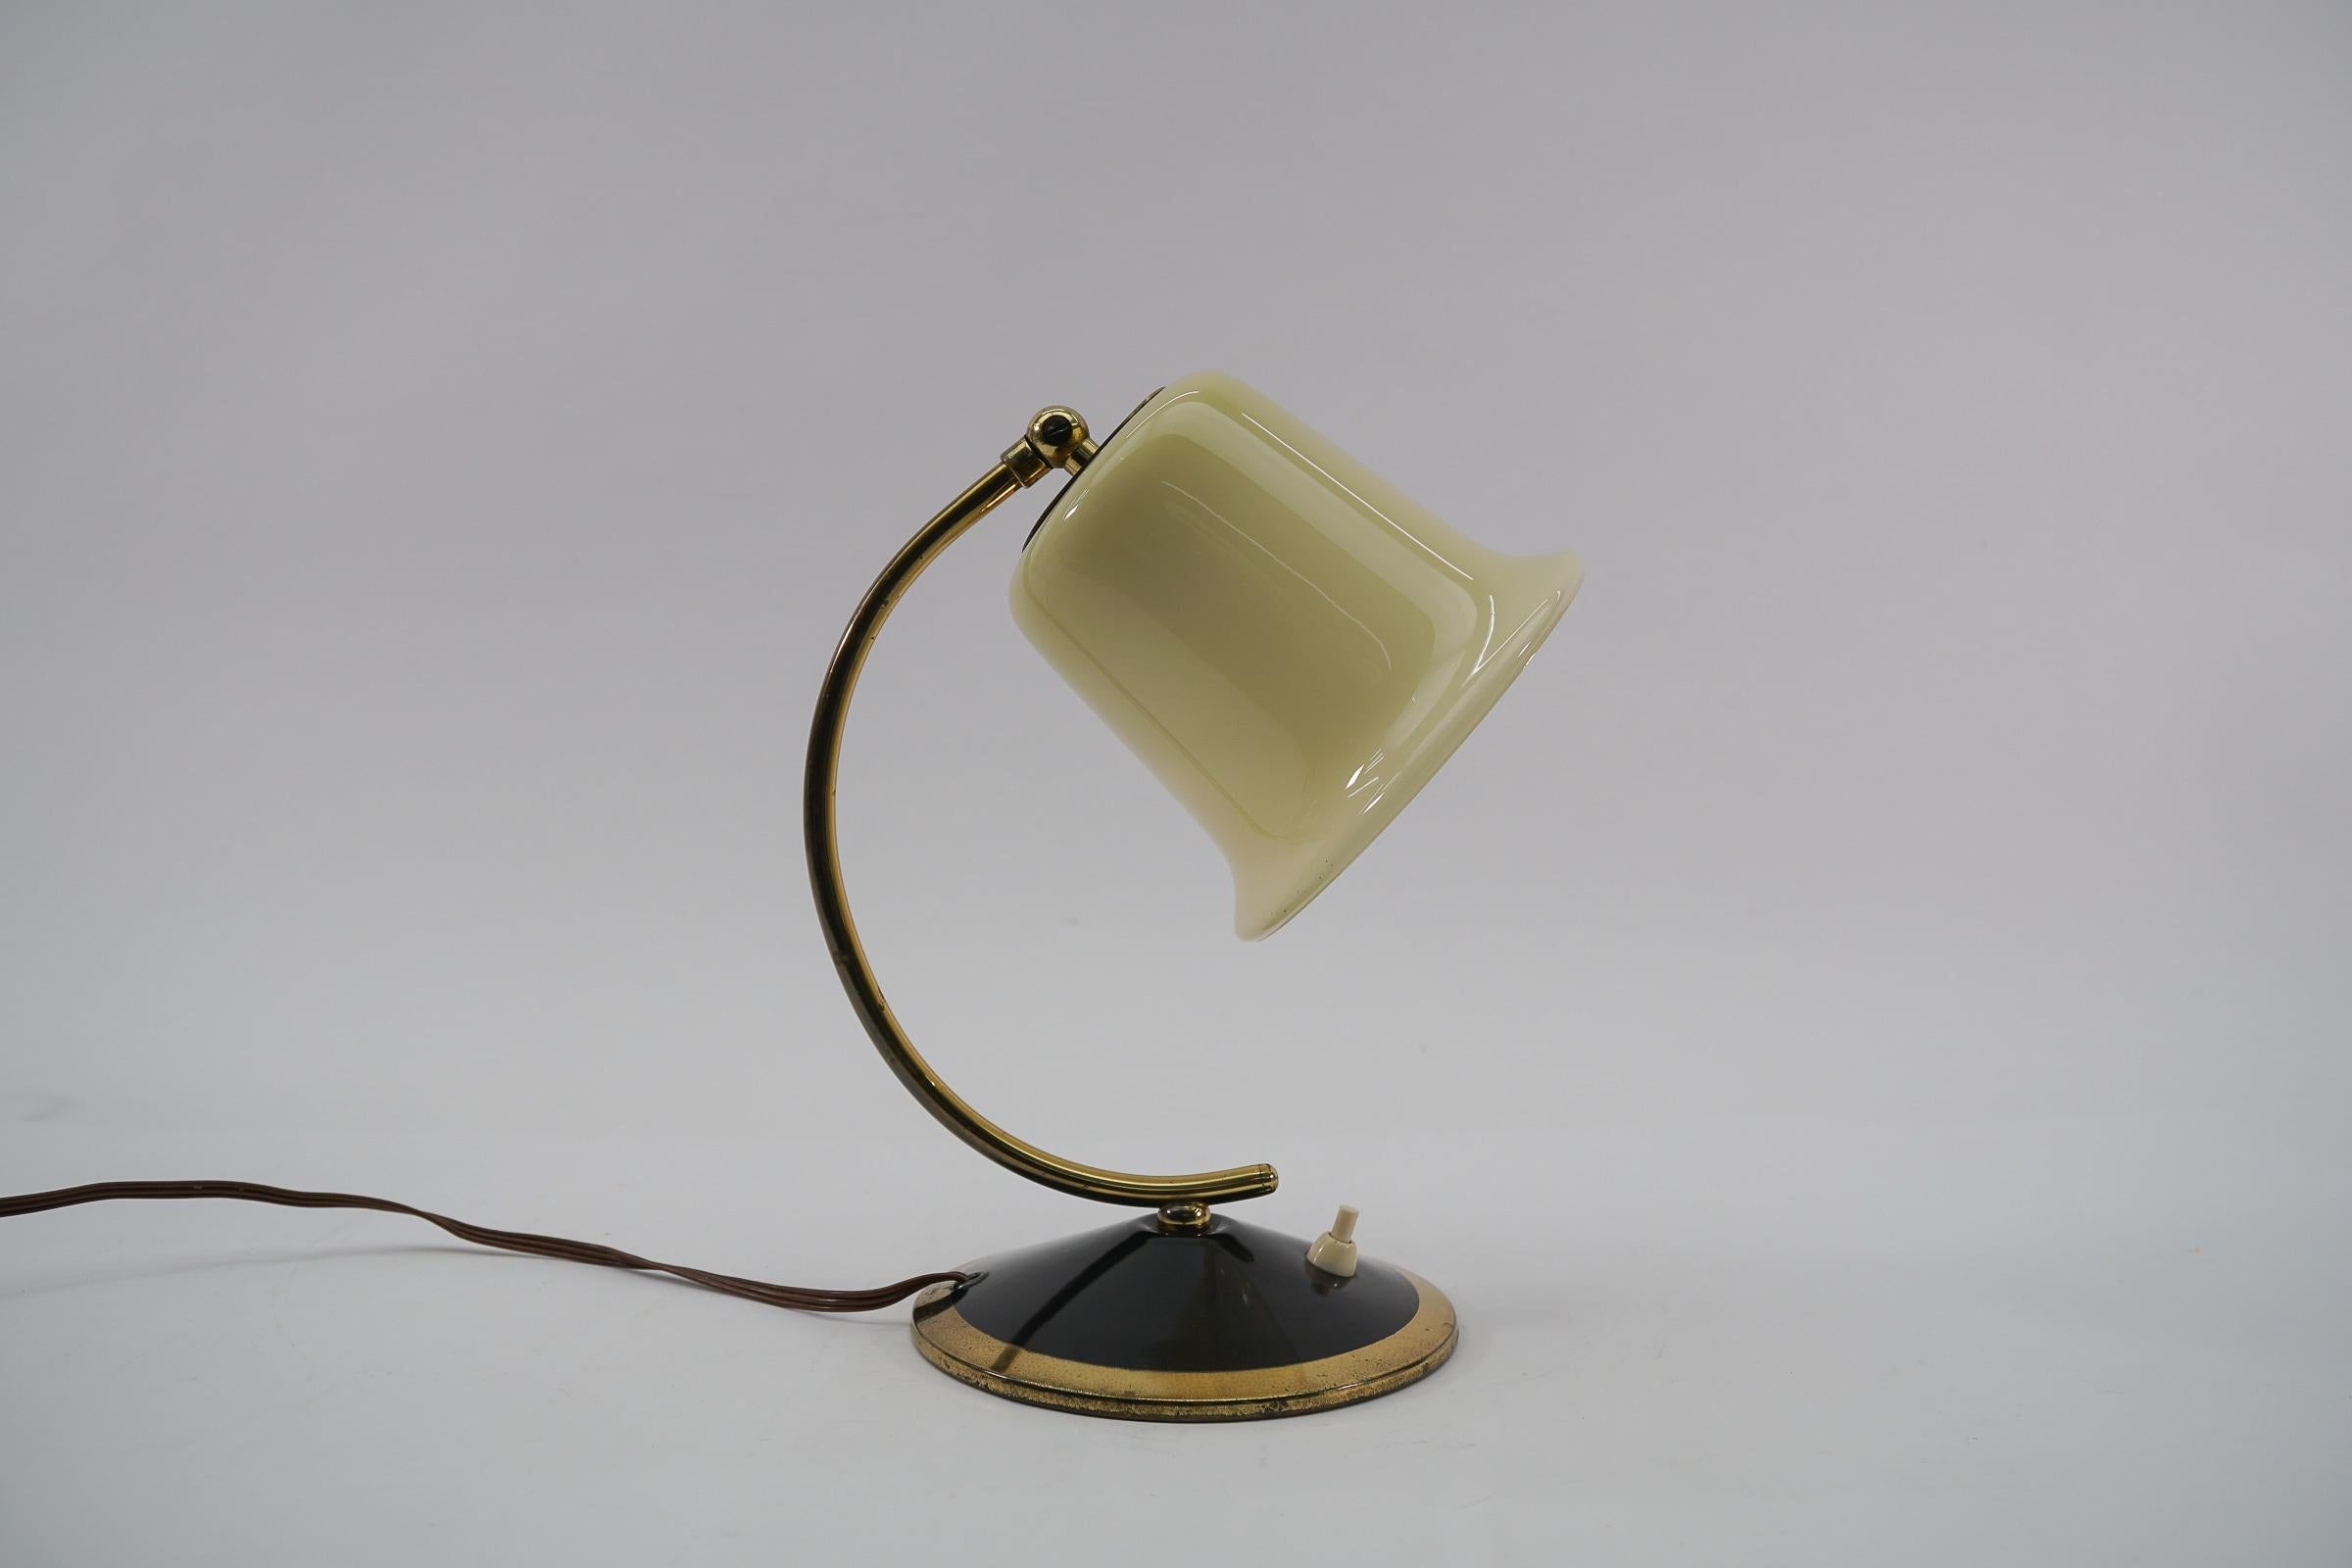 Lovely Midcentury Table Lampe Made in Glass and Brass, 1950s, Austria For Sale 5